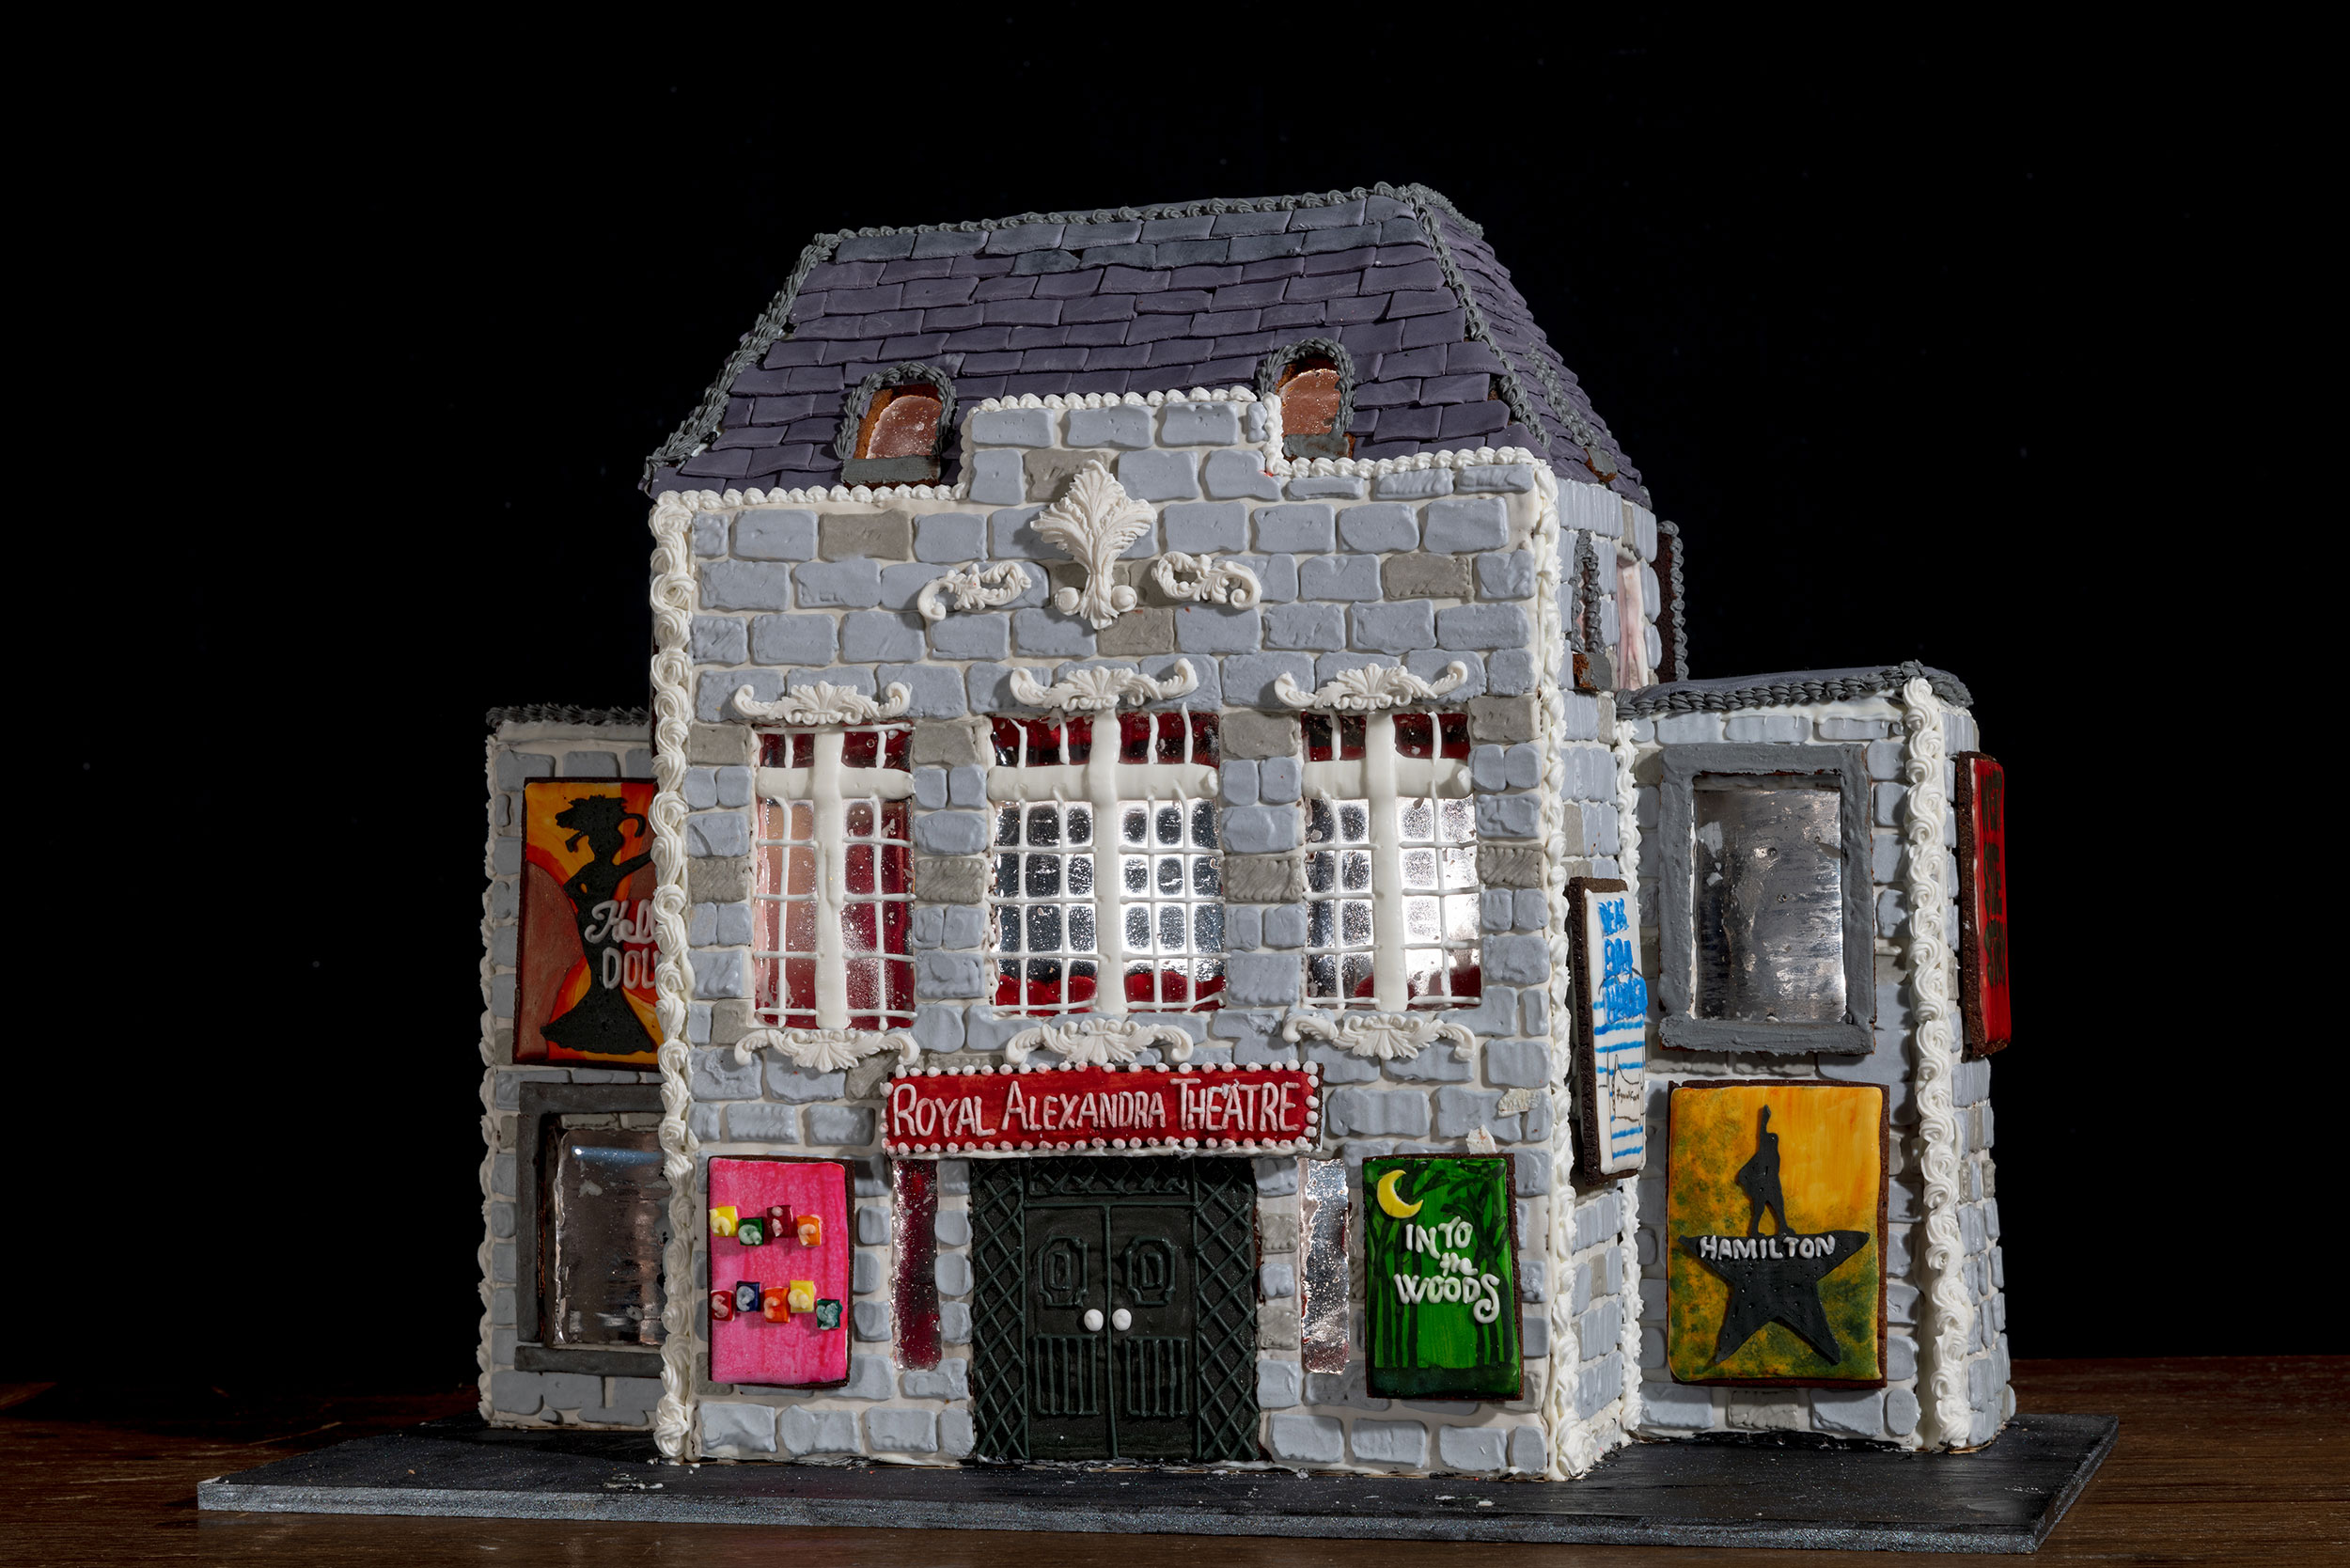 A gingerbread house replica of the Royal Alexandra Theatre, exterior view